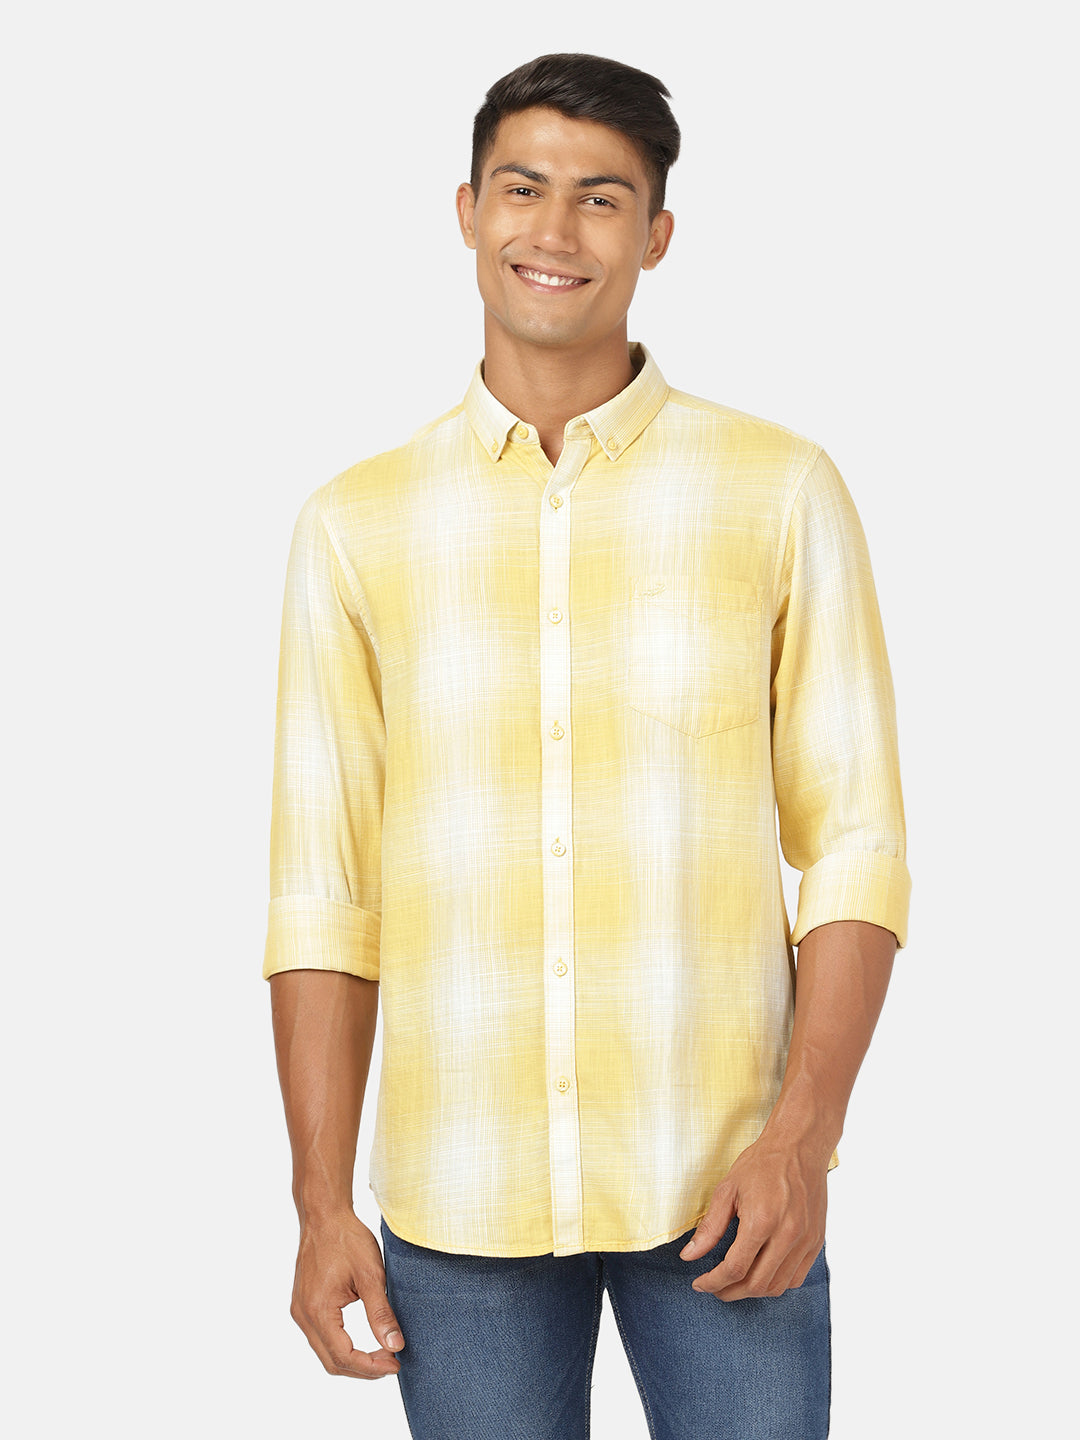 Crocodile Casual Full Sleeve Comfort Fit Checks Yellow with Collar Shirt for Men